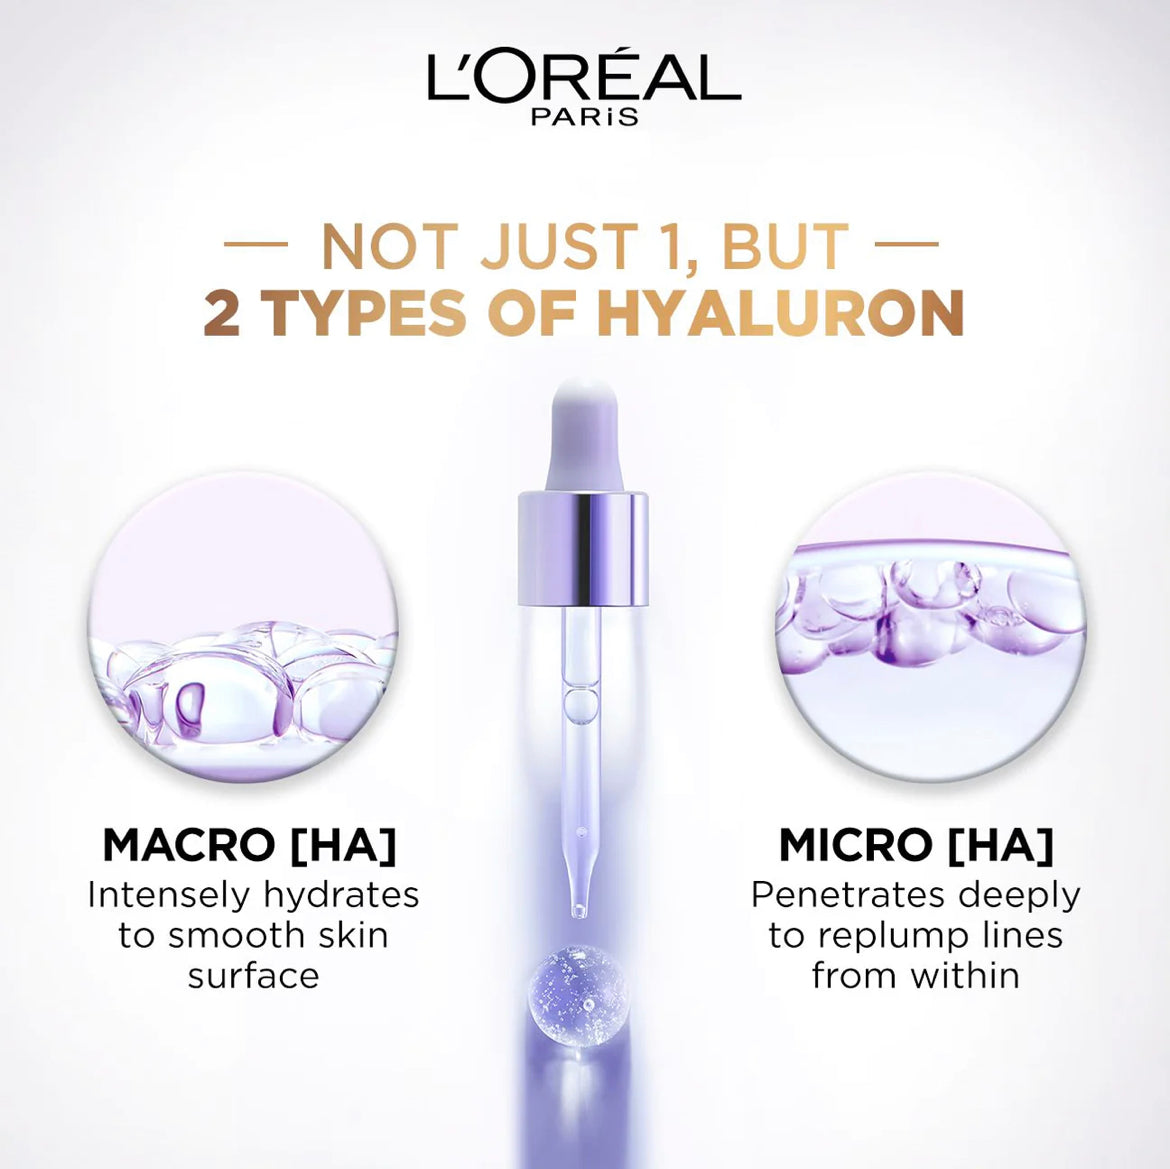 L'Oreal Paris Hyaluron Expert Moisturiser and Anti-Aging Plumping Serum with Hyaluronic Acid